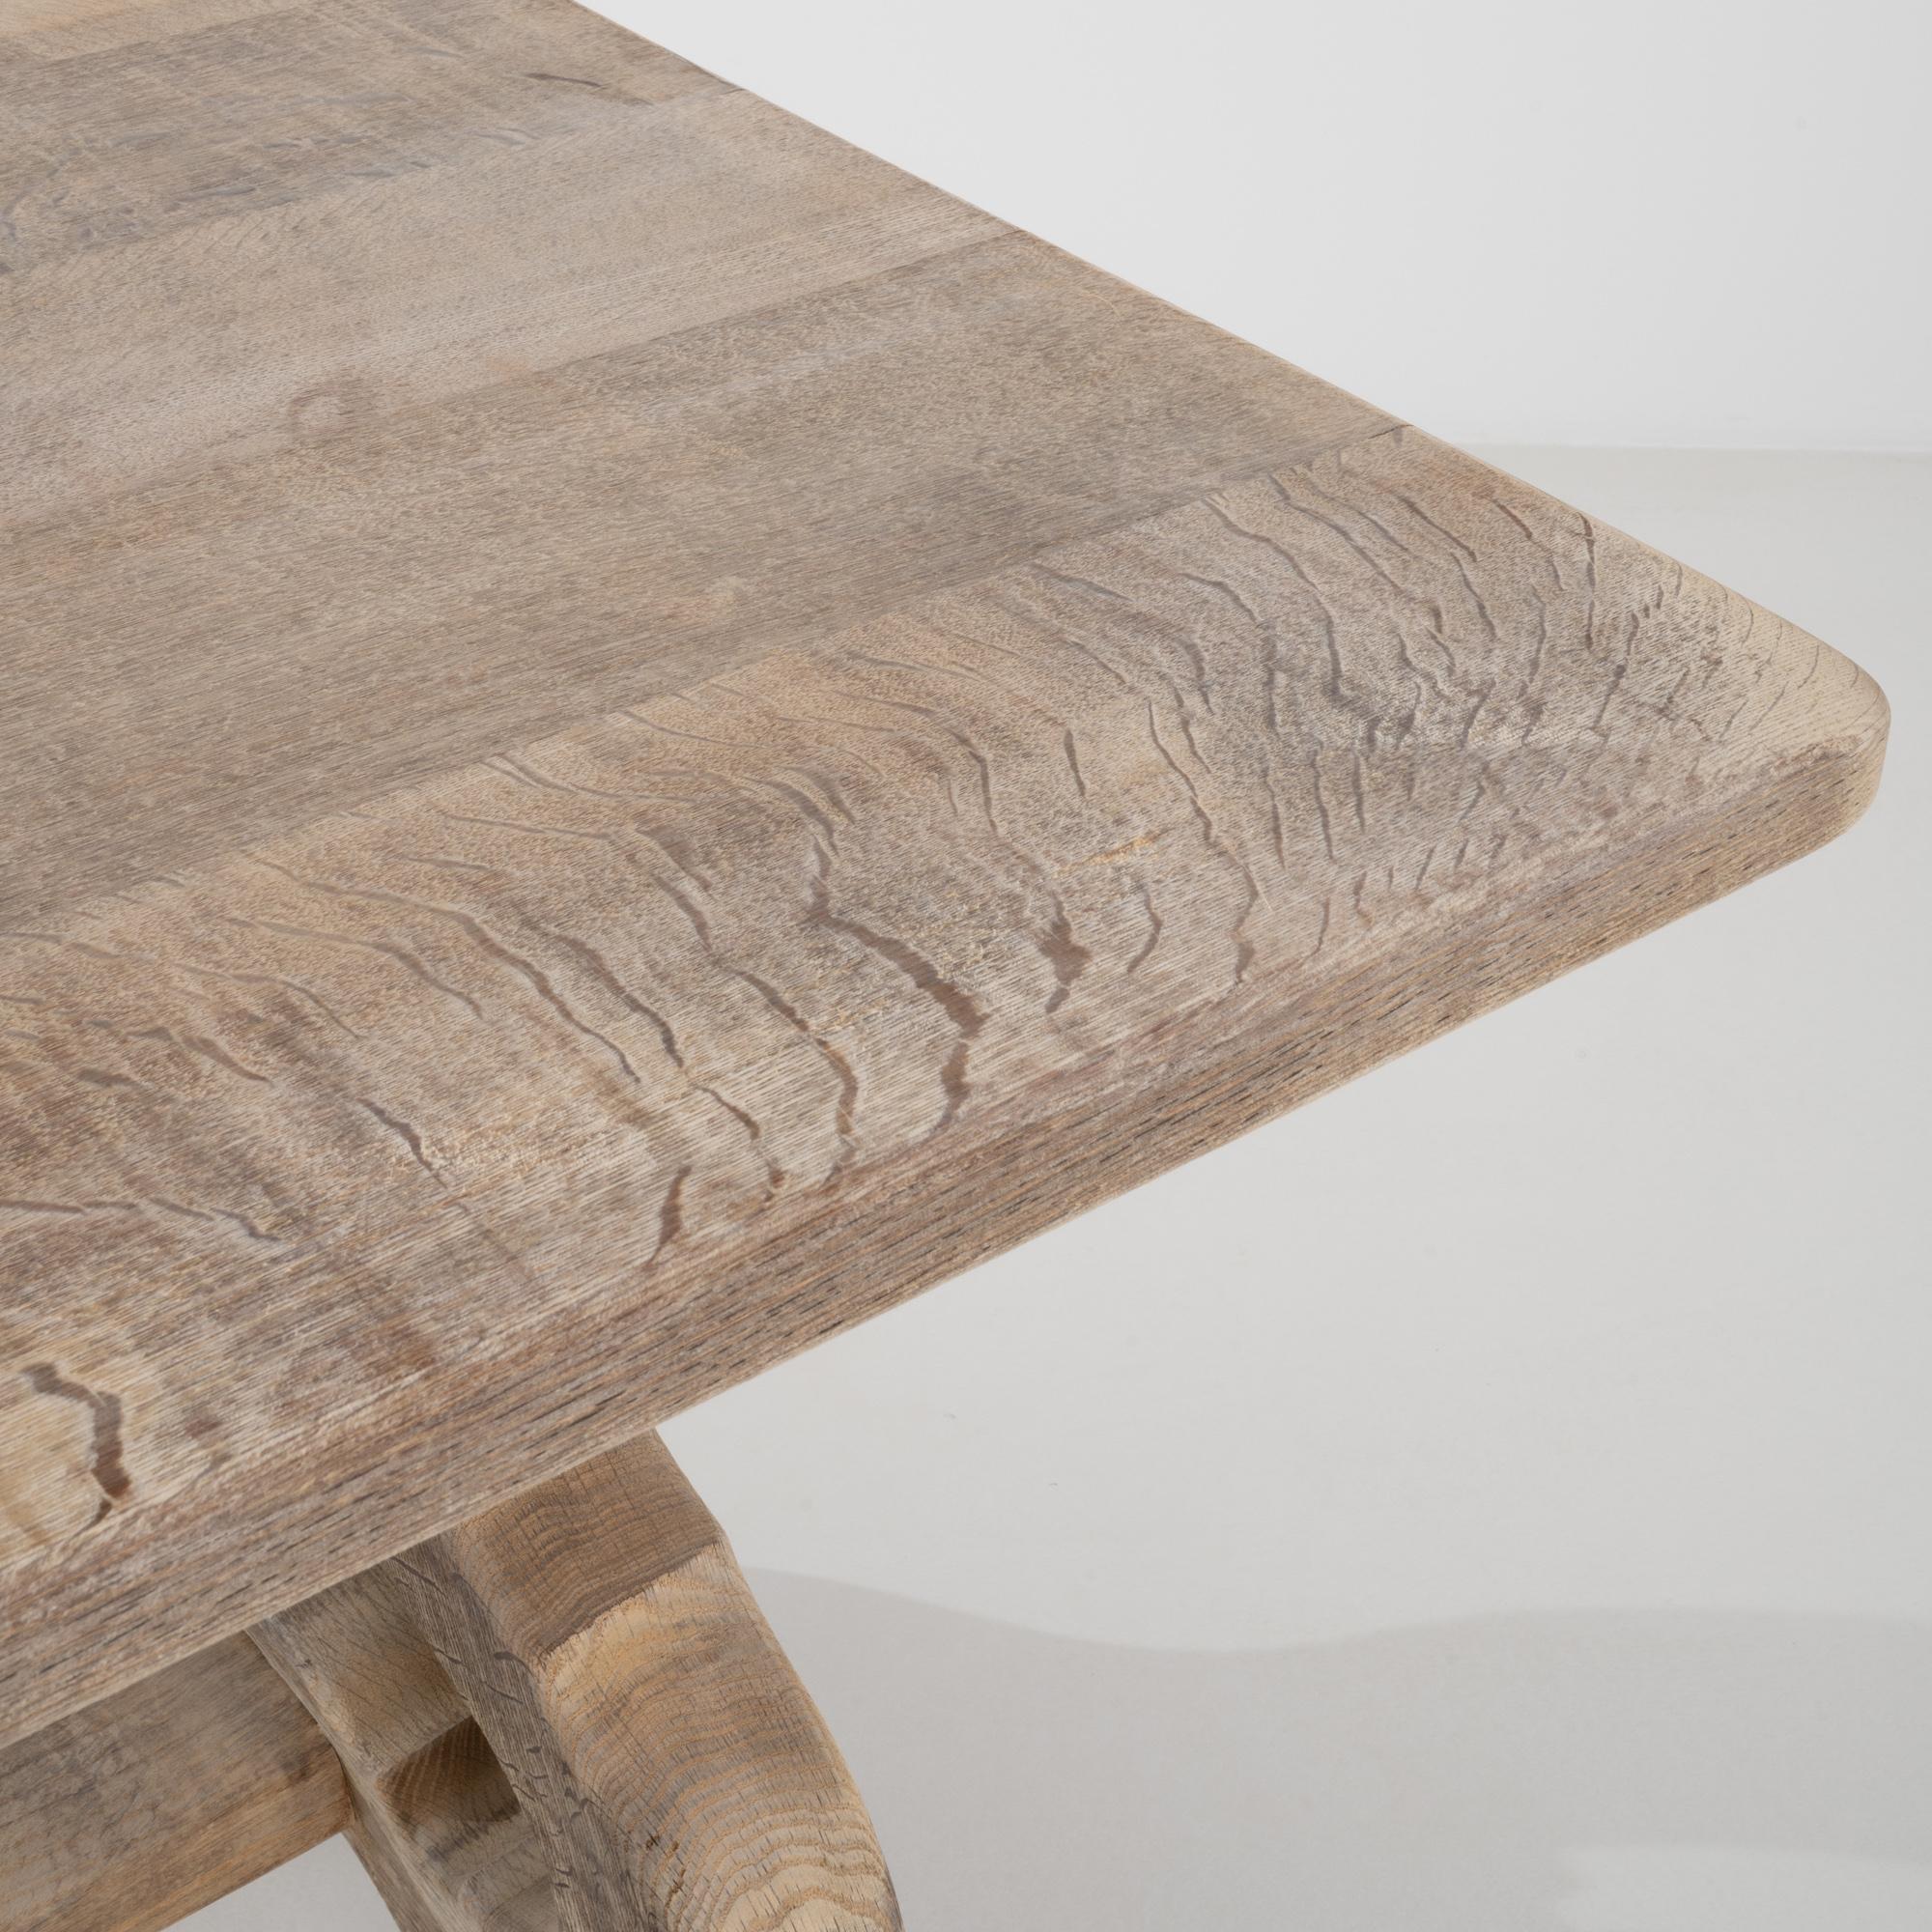 A french wooden dining table made from bleached oak. This trestle table is constructed from an expansive top with playfully winding legs, undergirded by a long support beam. Exposed joinery and wooden dowel rod pegs indicate its careful